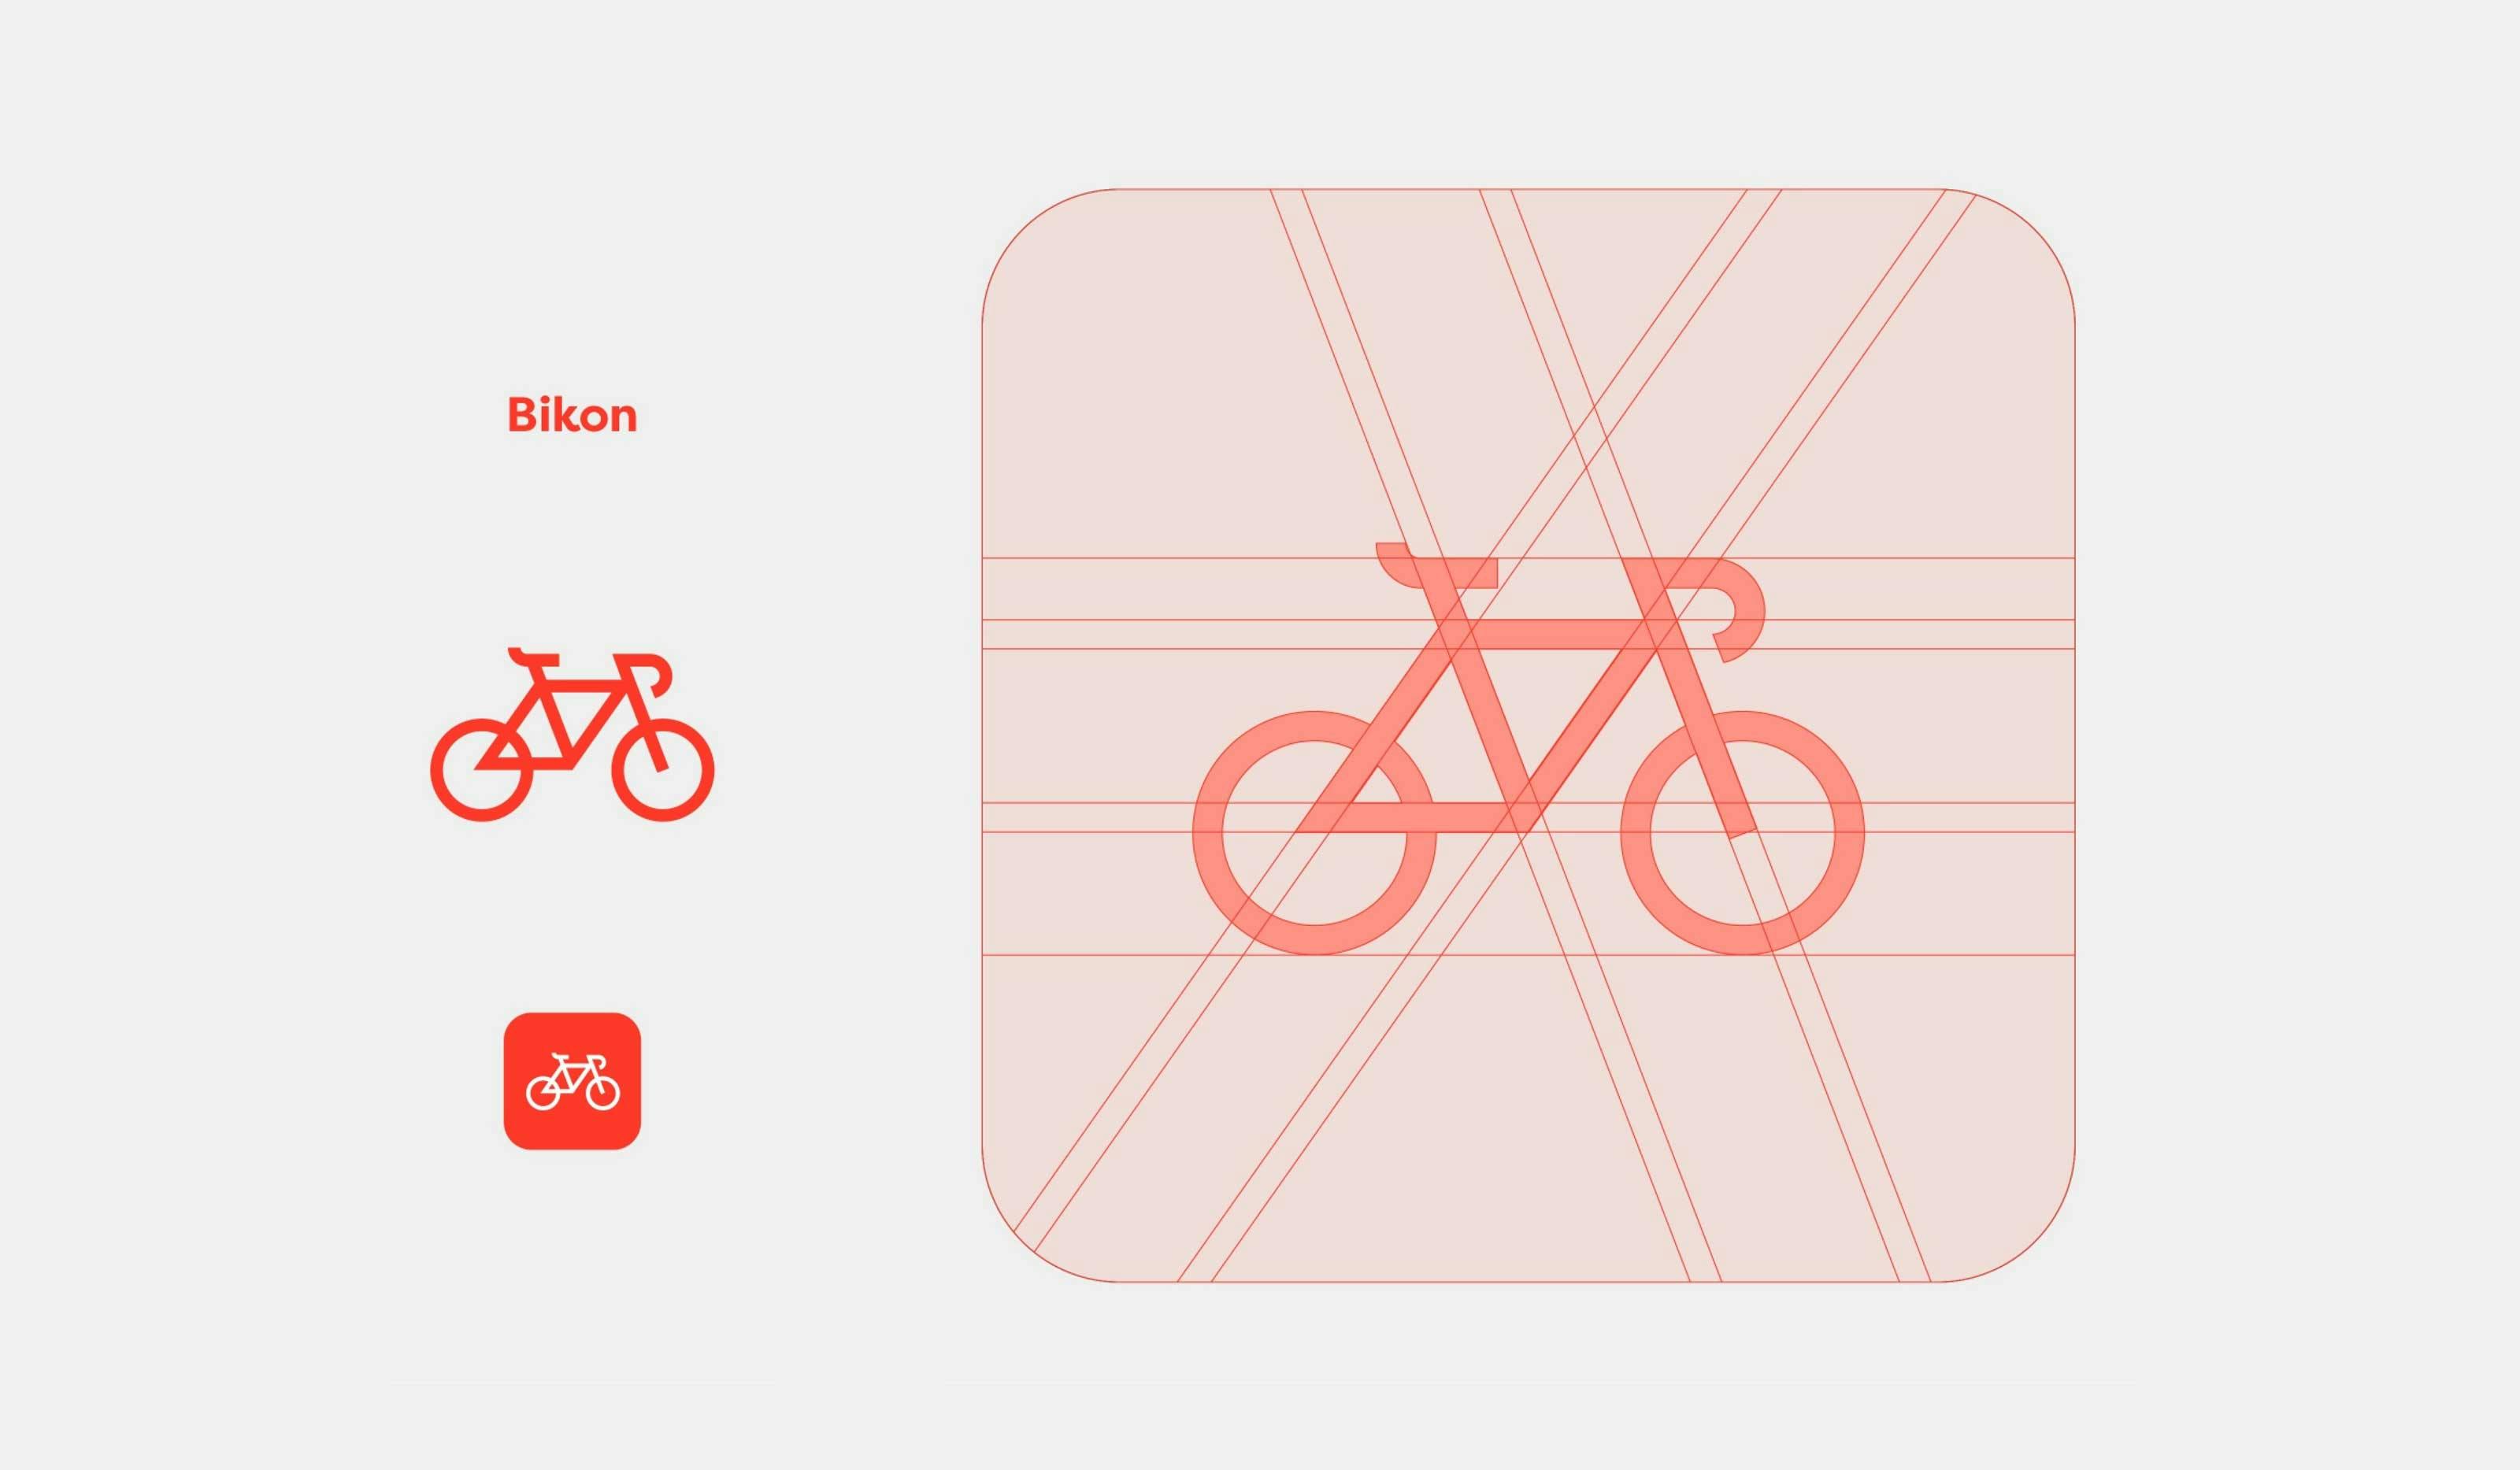 Bike-icon-at-different-sizes-on-a-grid-with-alingment.jpg